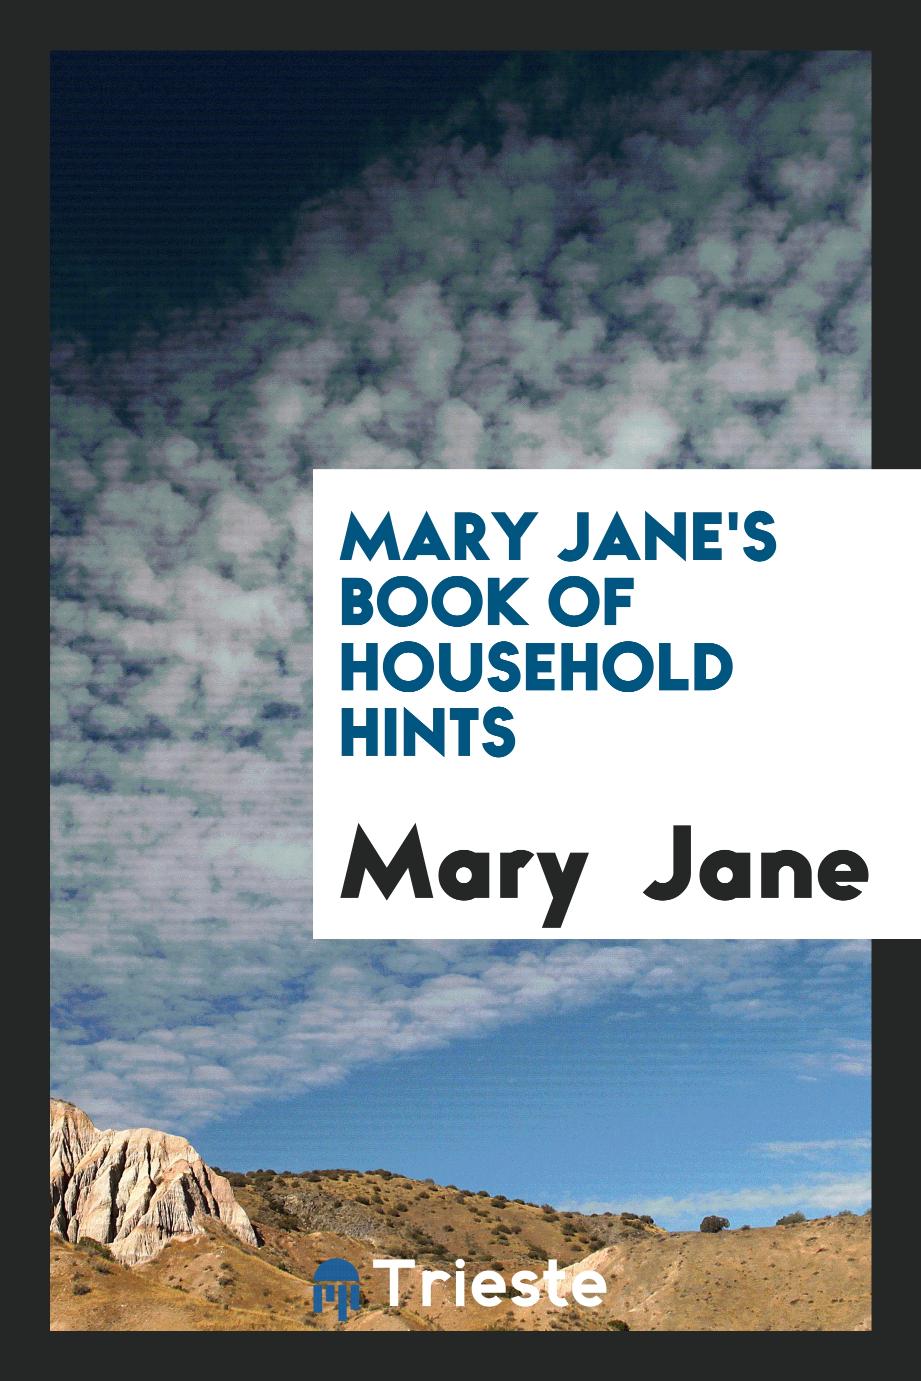 Mary Jane's Book of Household Hints